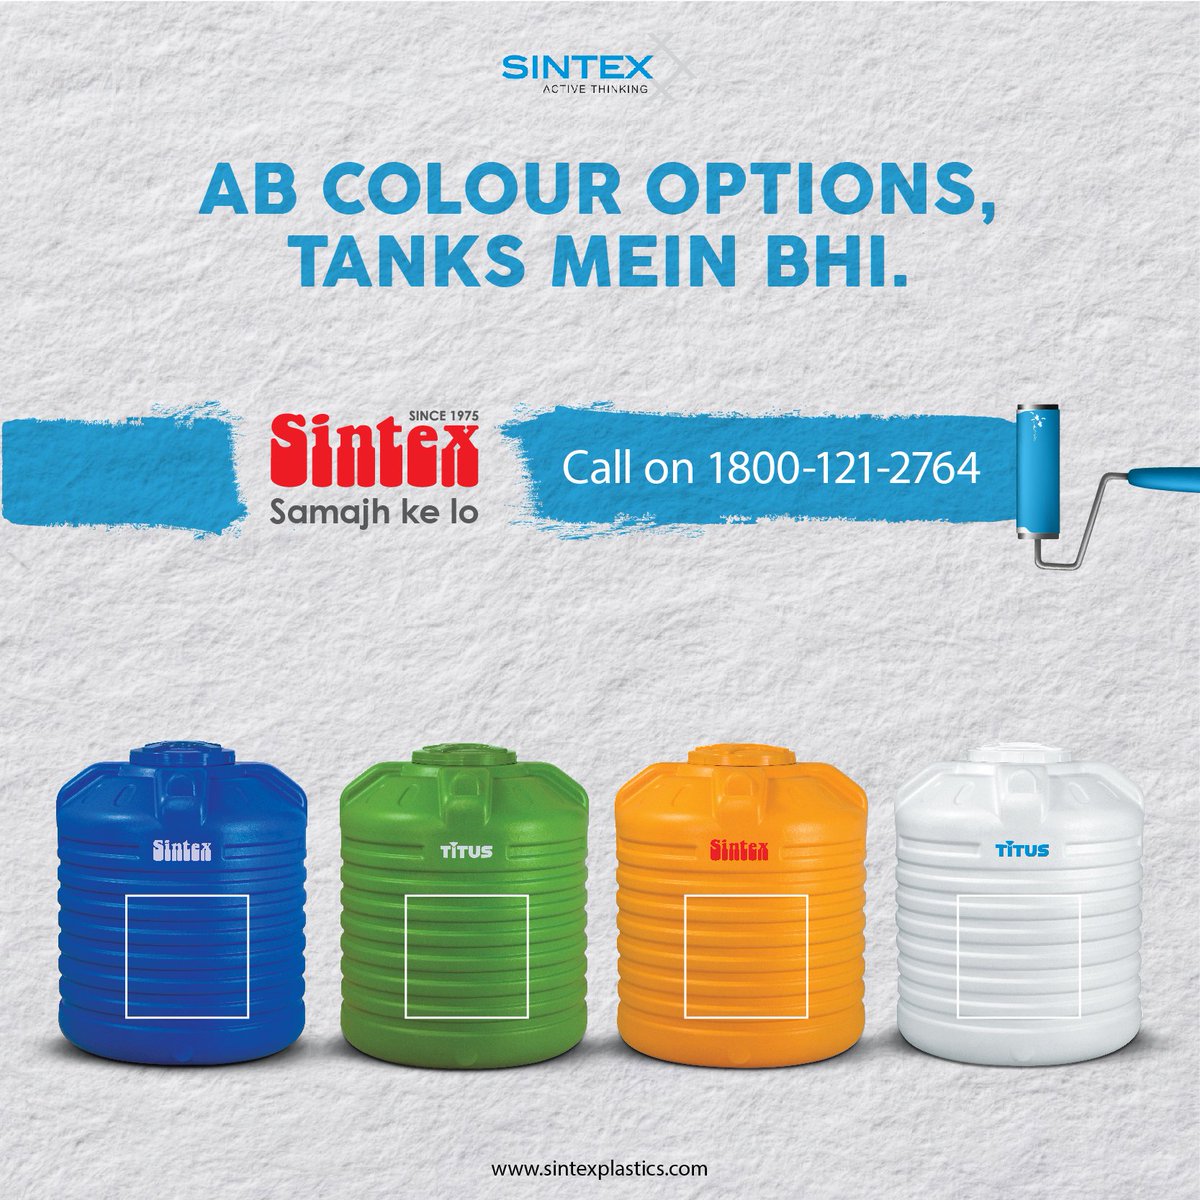 The new range of #Sintex water tanks are not only attractive to look at but are made with the latest technology that protects the water from the harmful UV rays of the sun & shields it against all germs.#Diwali #Sintex #SintexTitus